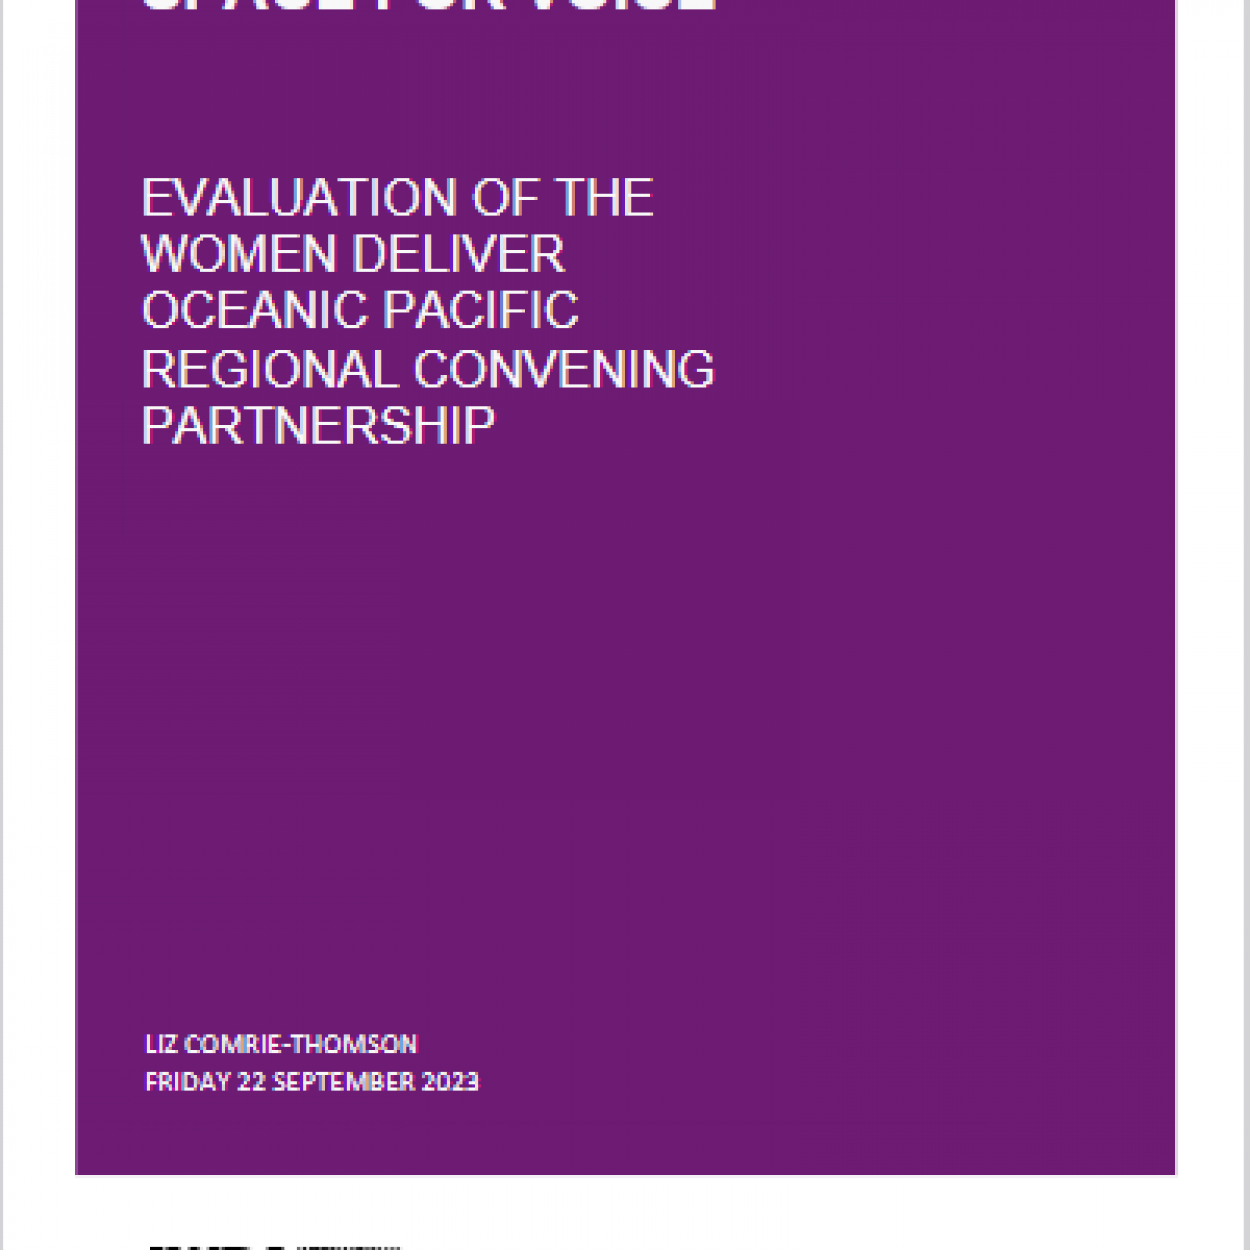 Front cover: Space for voice: Evaluation of the Women Deliver Oceanic Pacific Regional Convening Partnership Liz Comrie-Thompson Friday 22 September 2023. IWDA logo